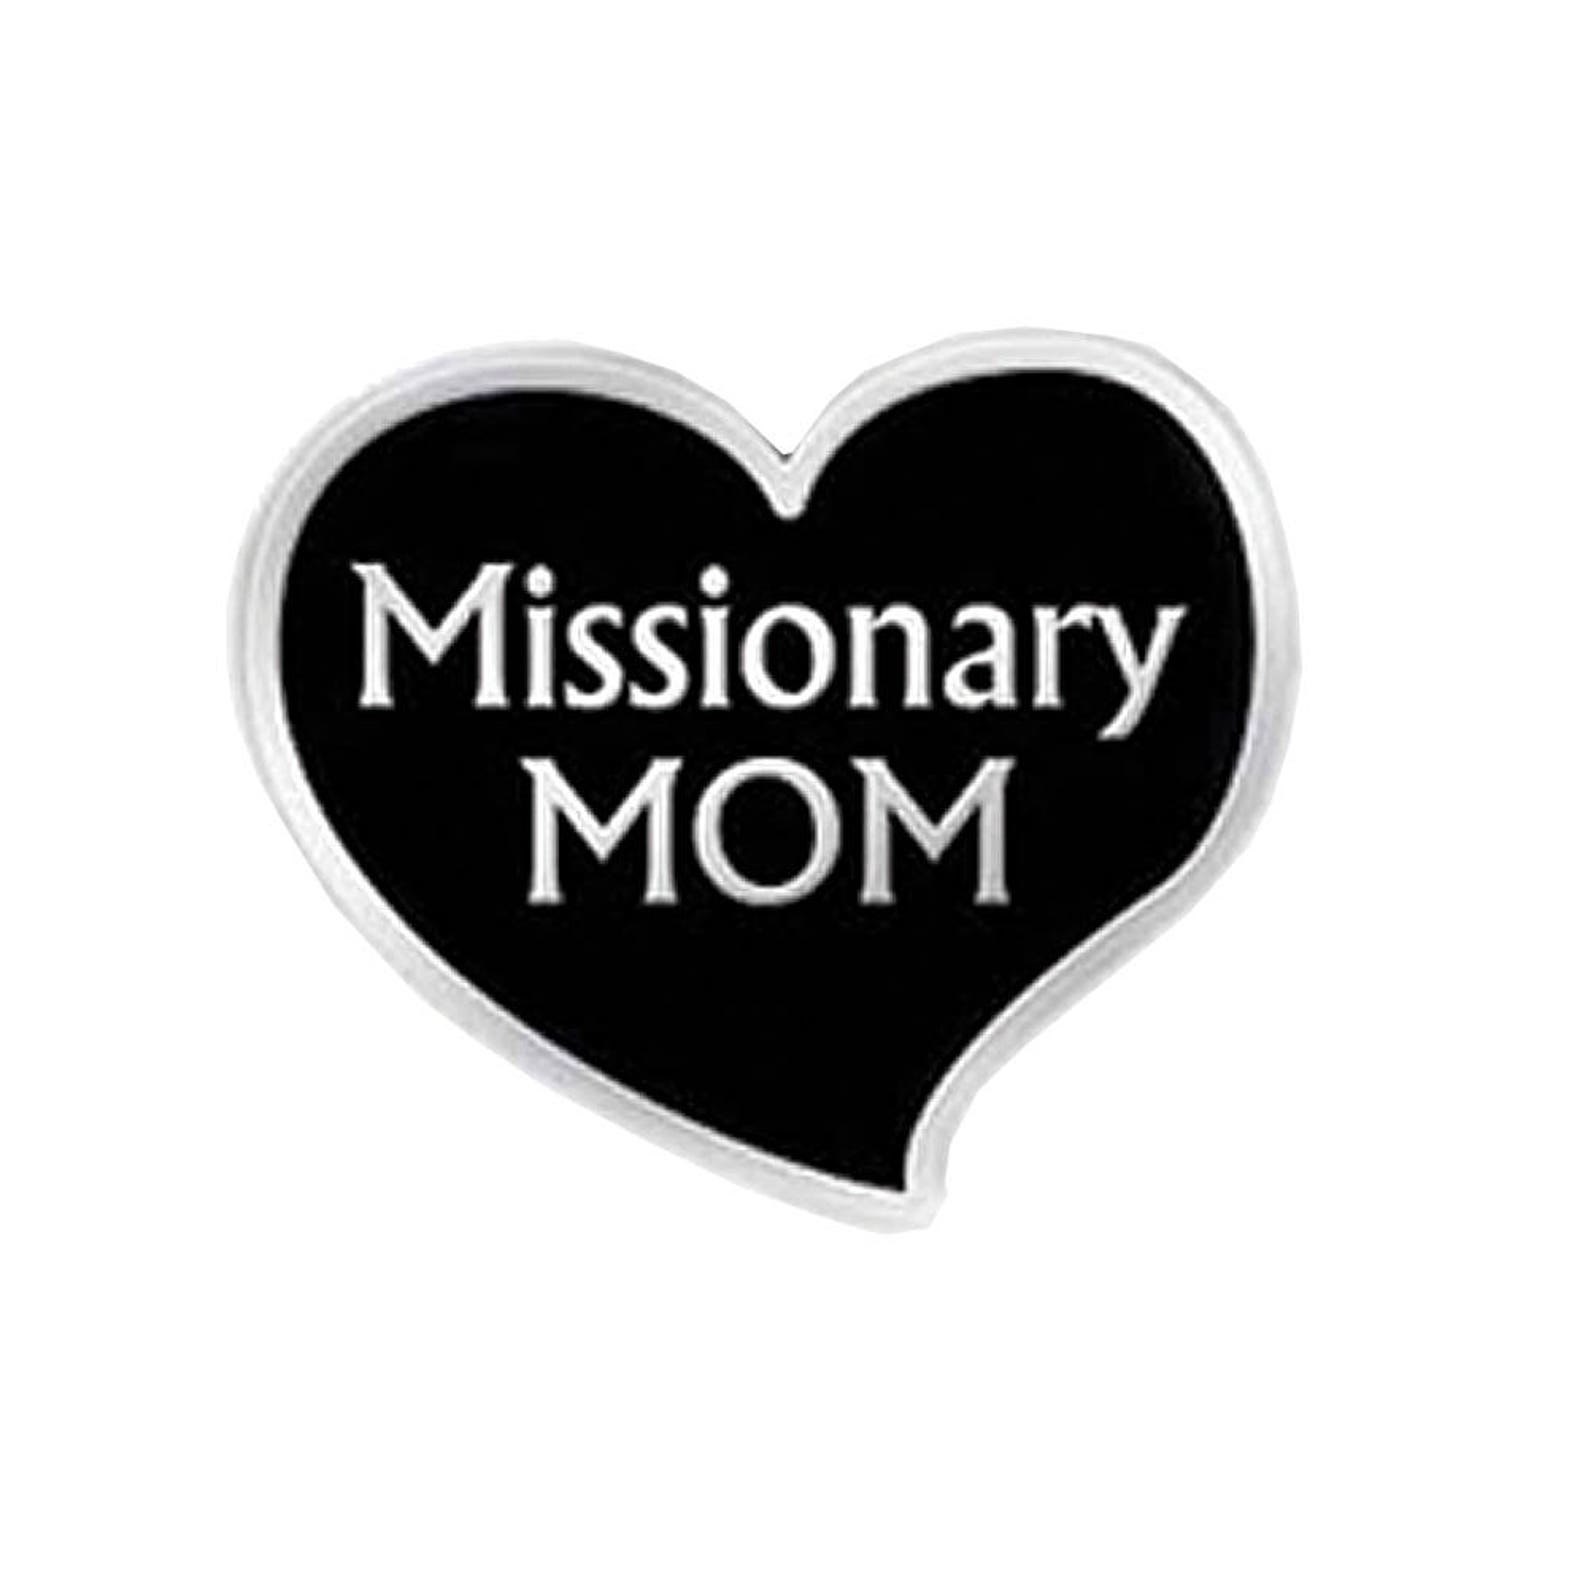 Blonde missionary. Missionary. Mom Heart. Mother missionary. Heartbeat mom.